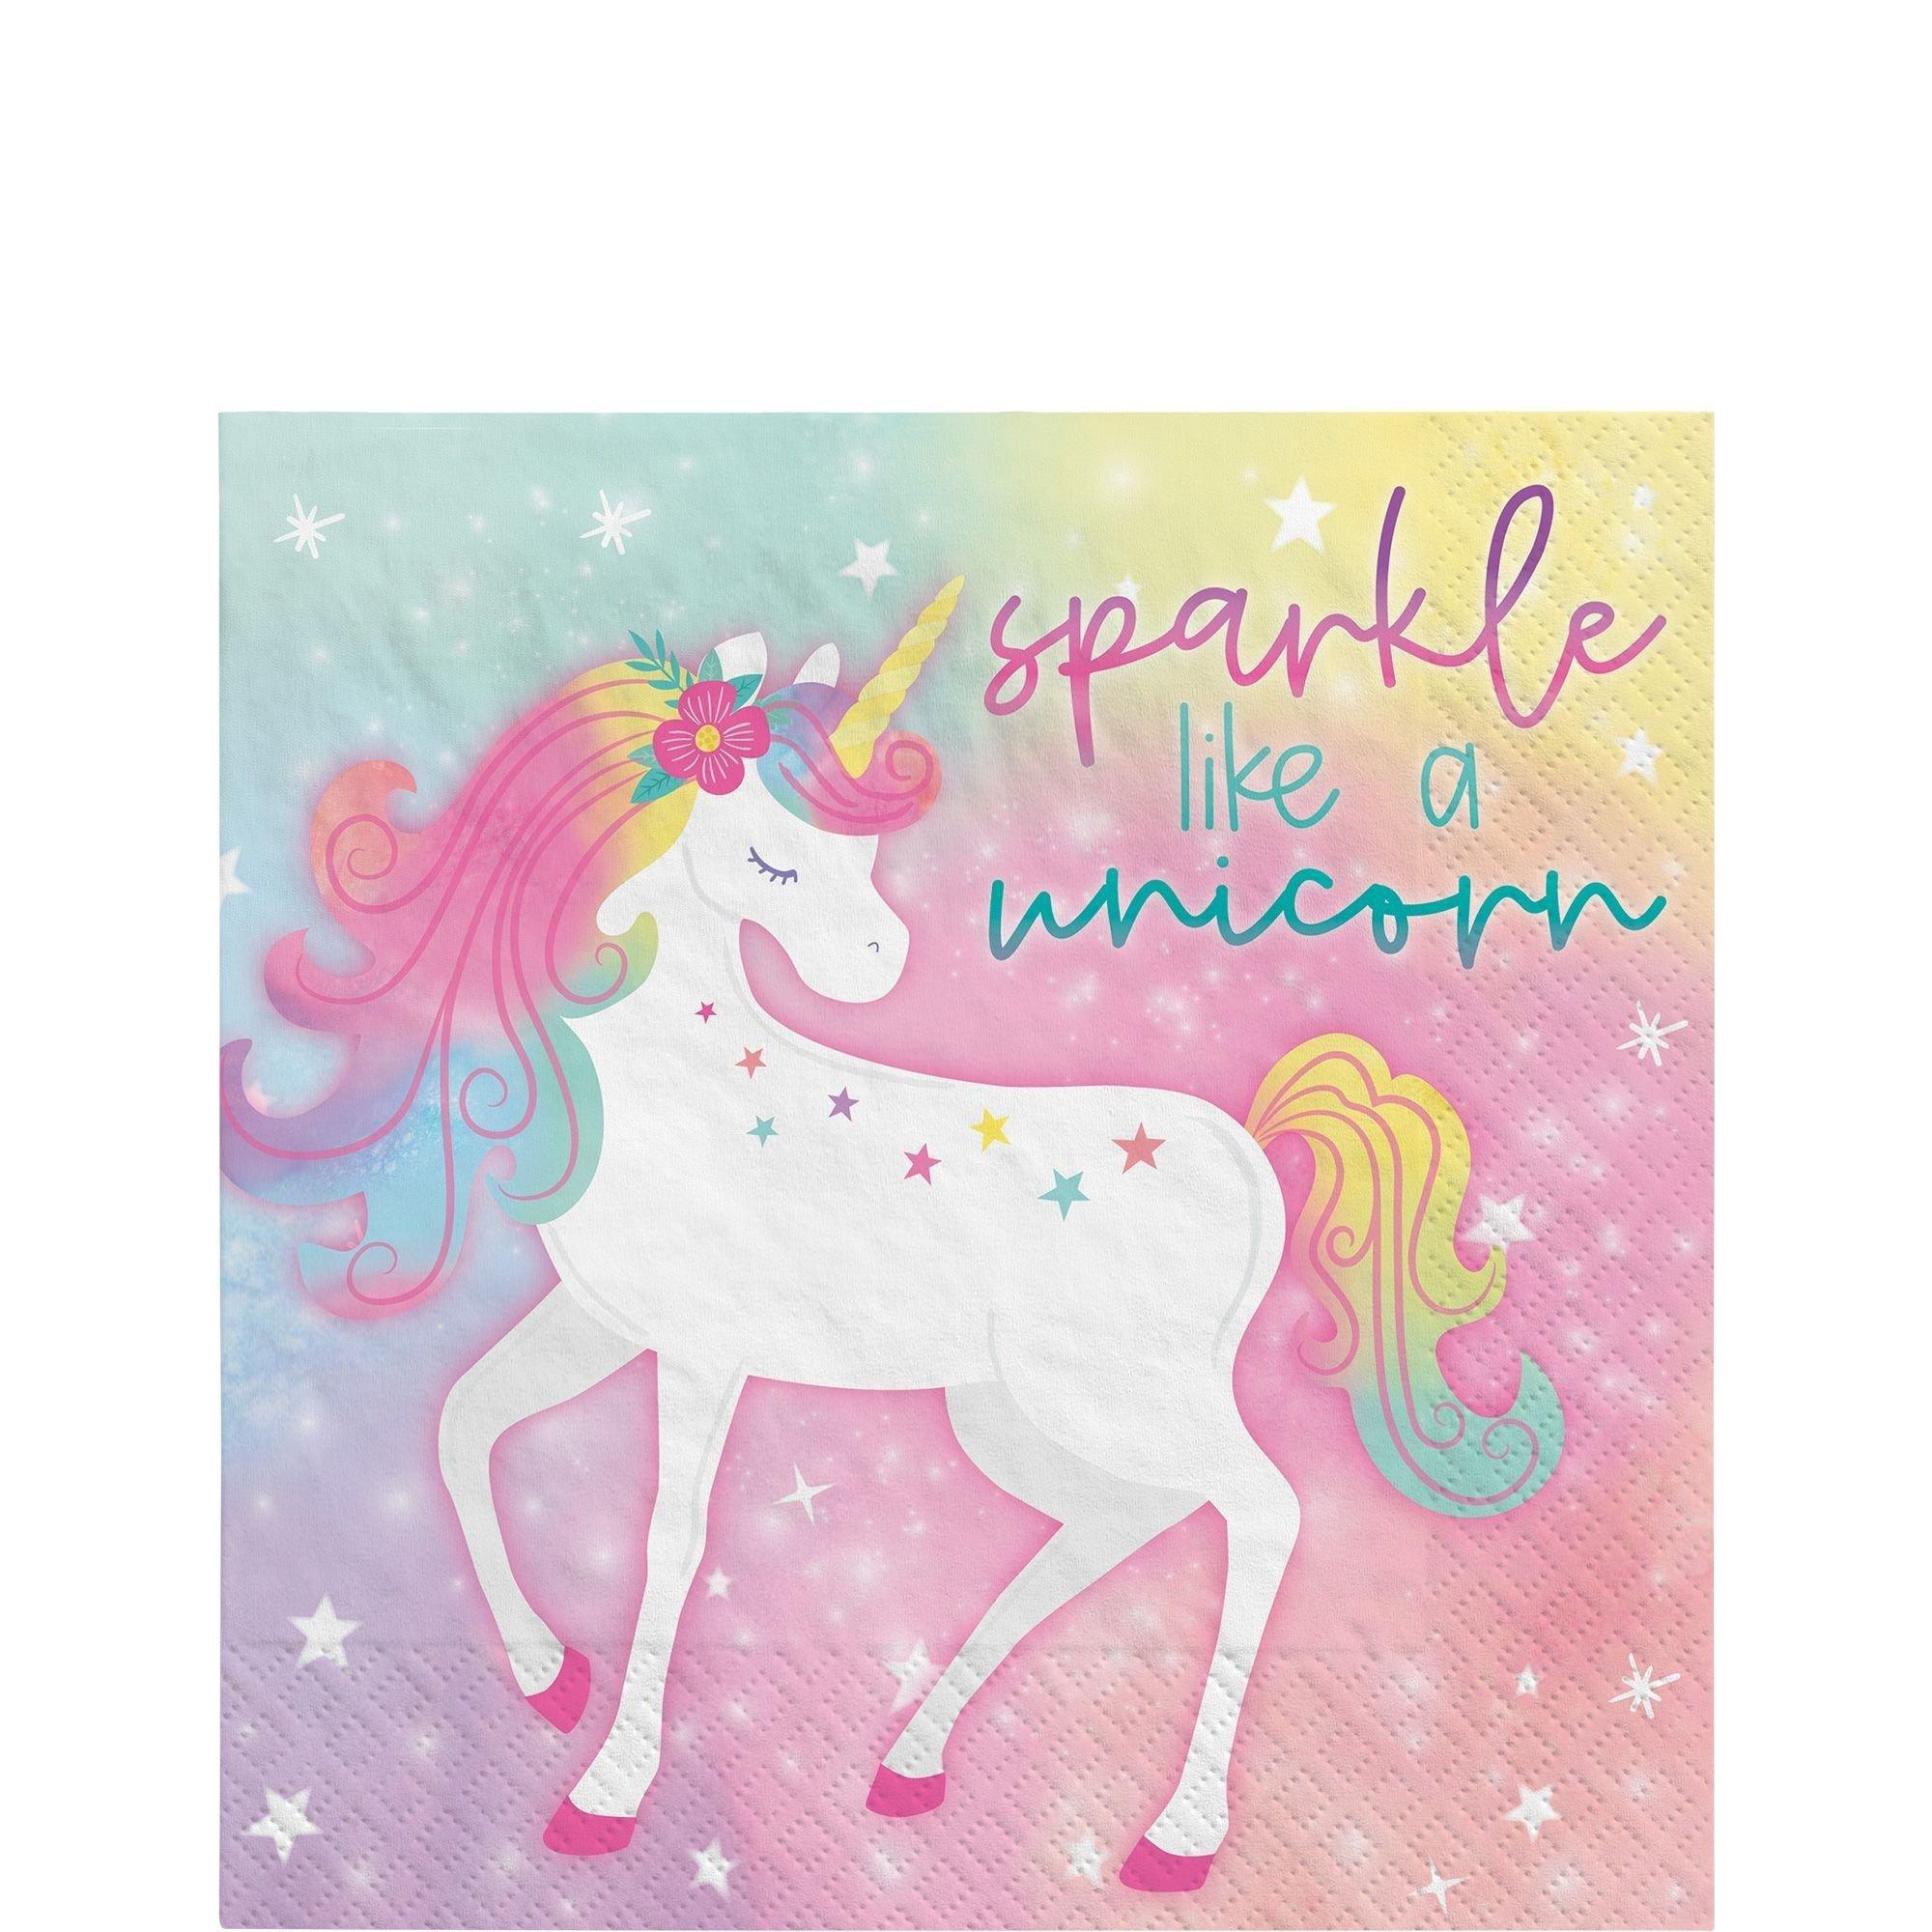 Enchanted Unicorn Party Supplies Pack for 8 Guests - Kit Includes Plates, Napkins & Table Cover